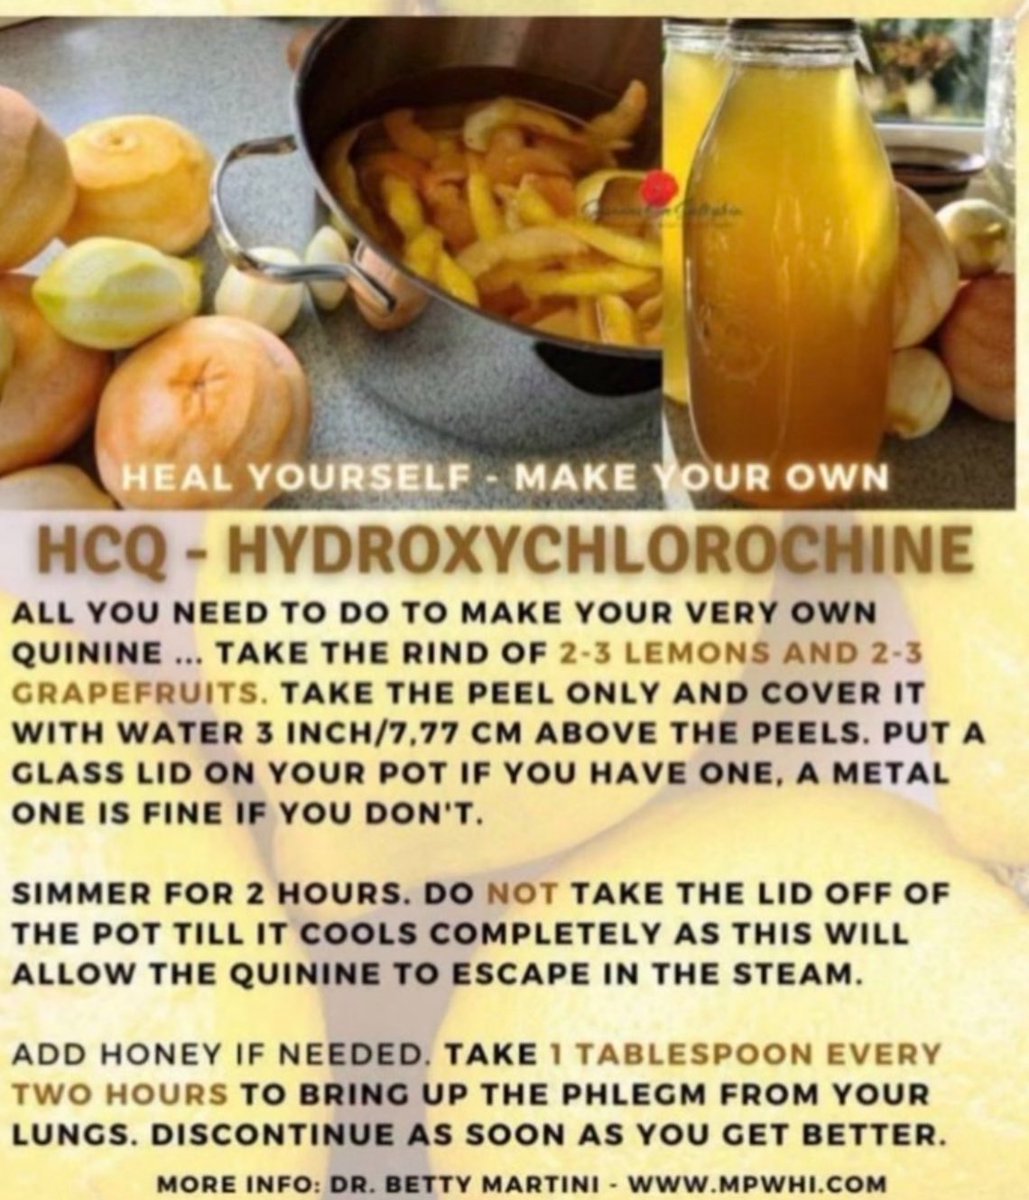 @Thekeksociety #HCQ #HydroxyChloroquine 
Recipe you can make at home